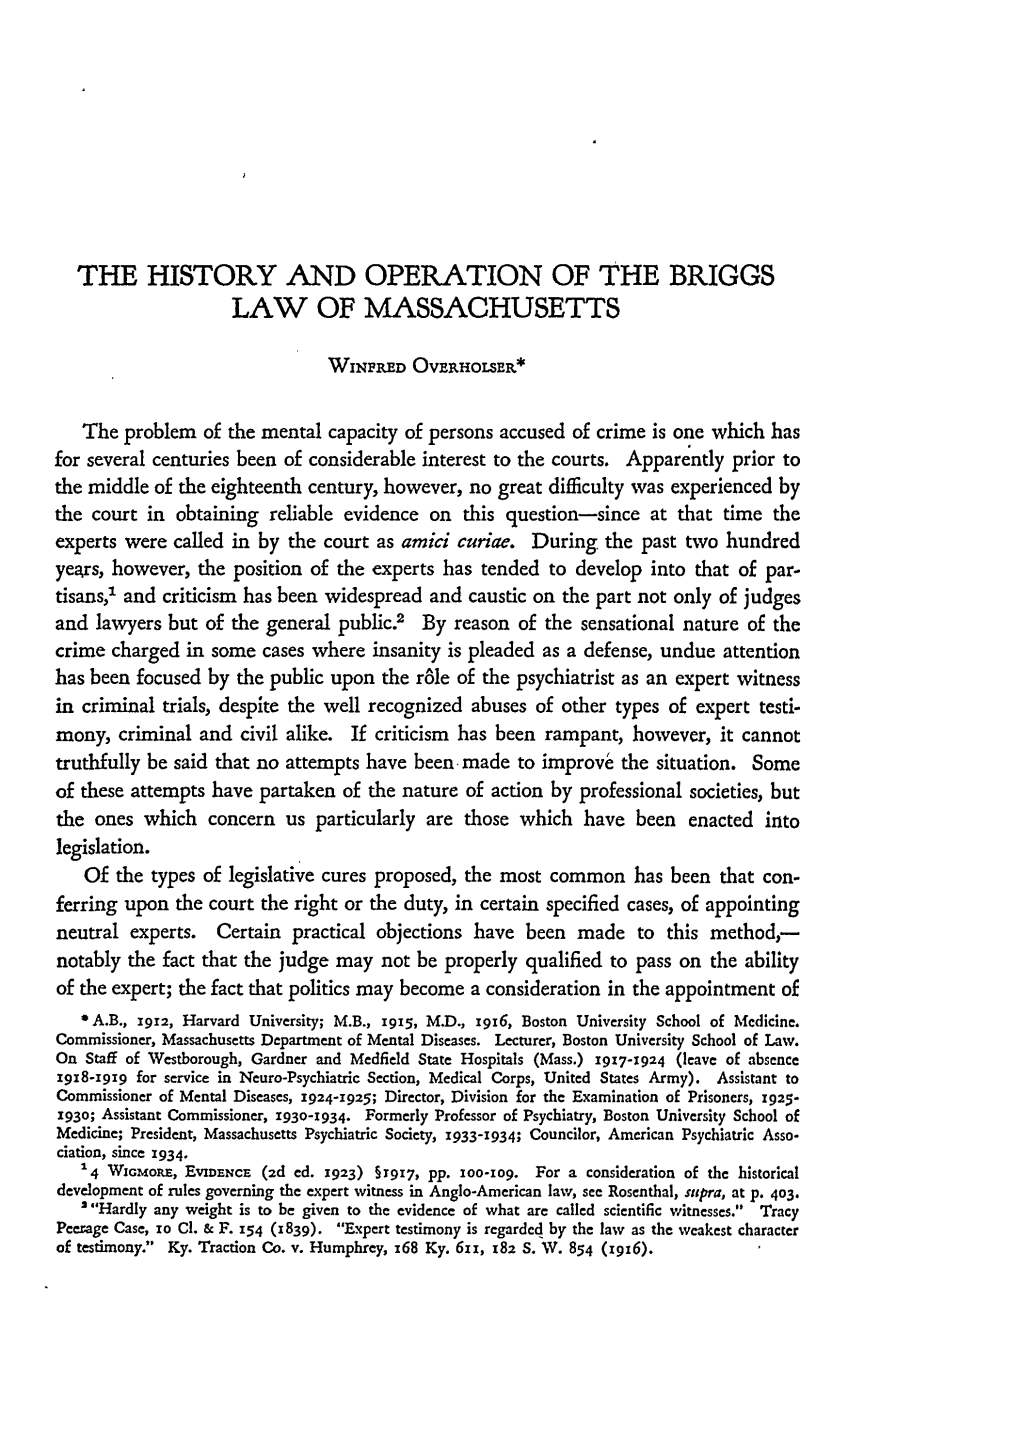 The History and Operation of the Briggs Law of Massachusetts